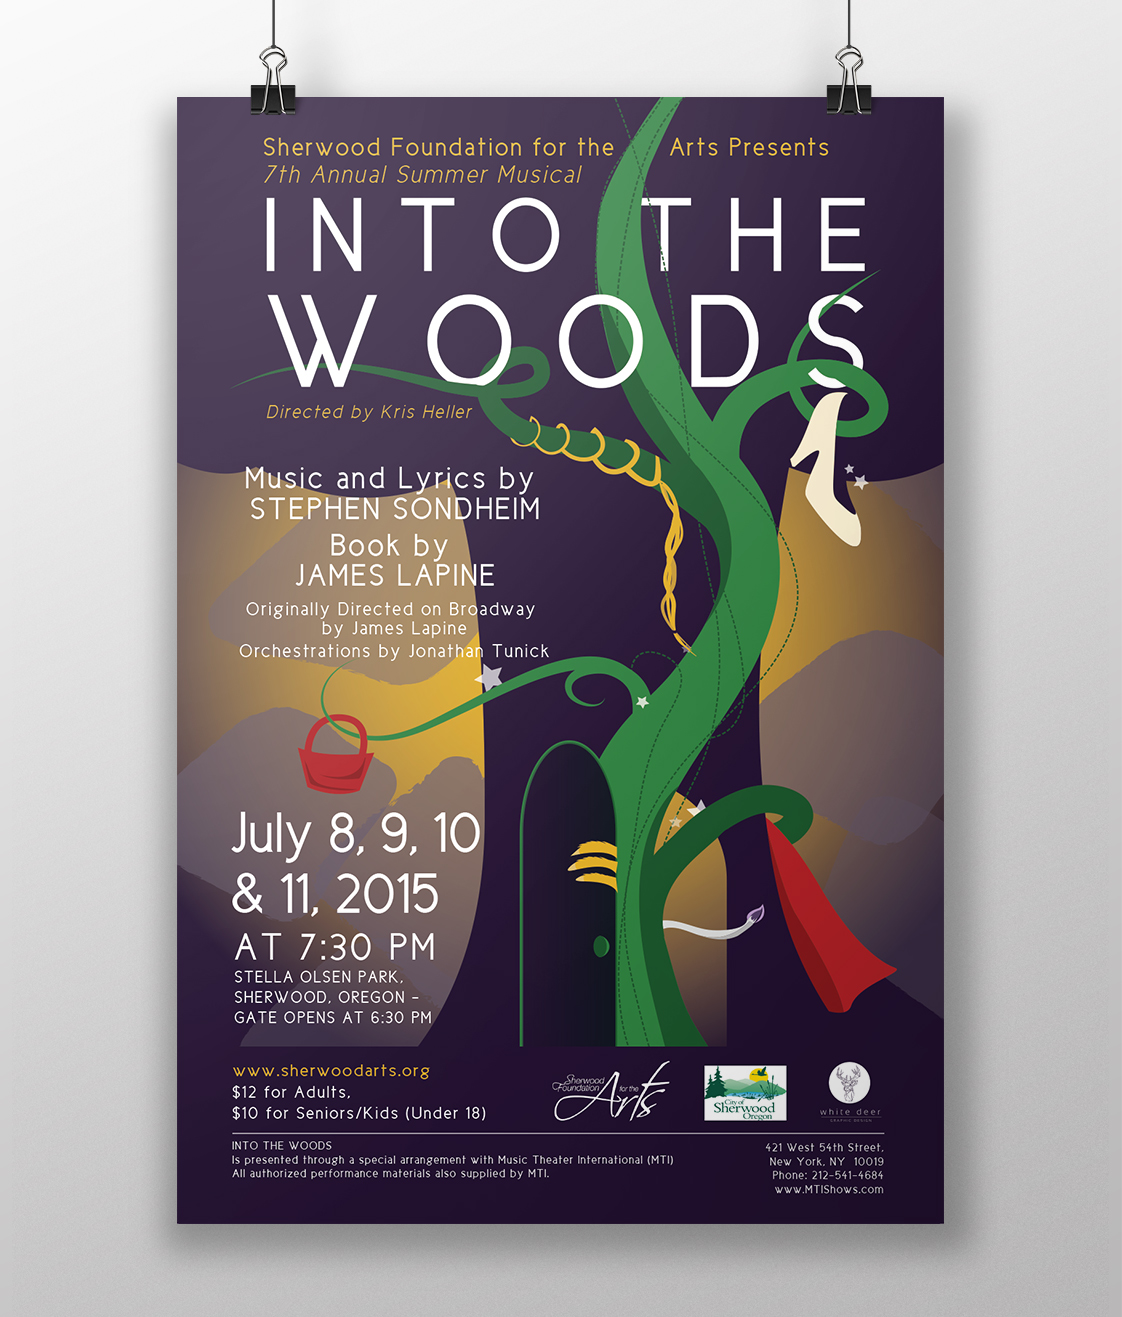  Promotional Poster for Sherwood Foundation of the Arts musical production of Into the Woods.&nbsp; 